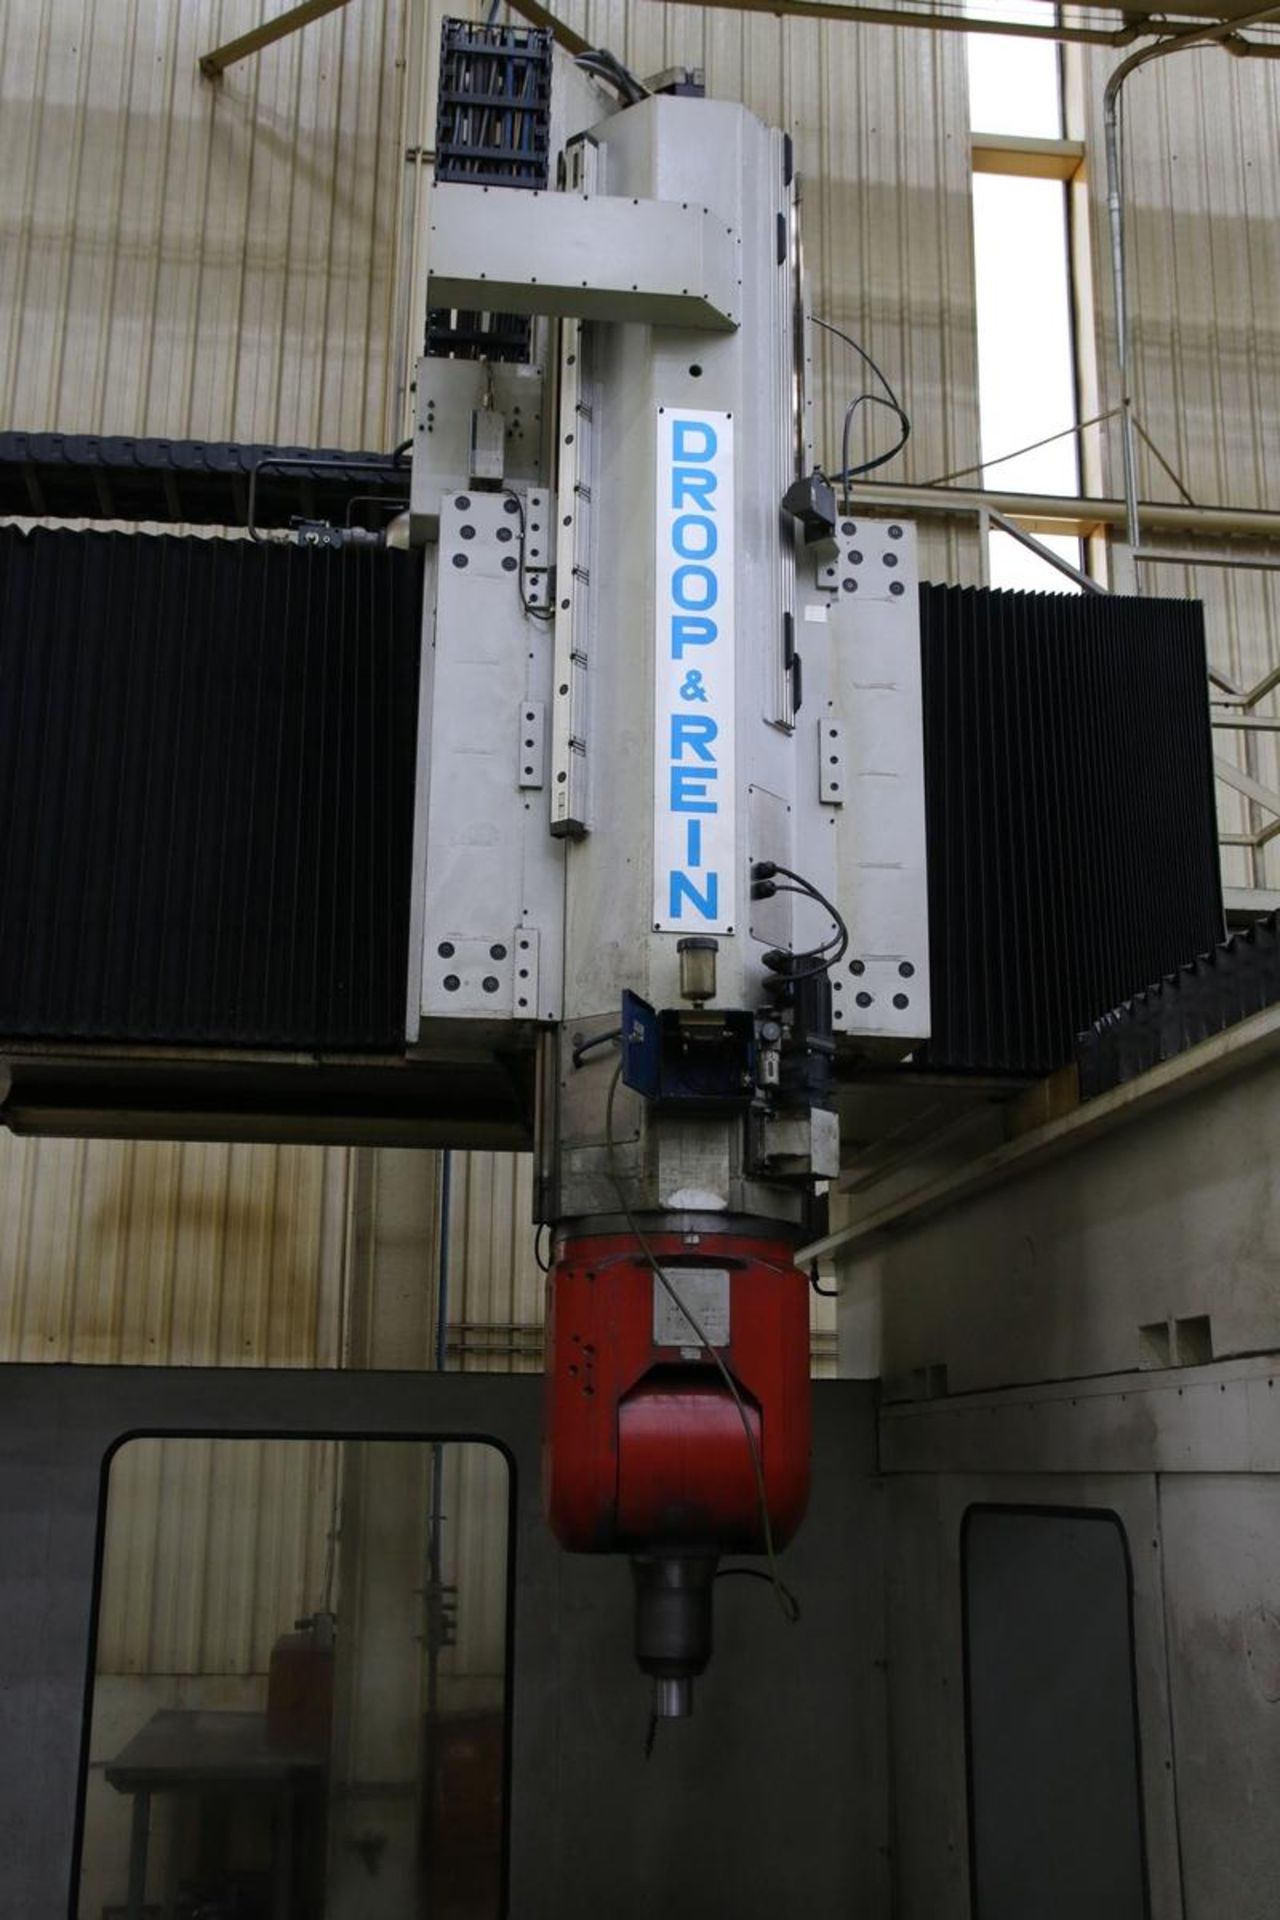 1995 Droop & Rein FOG 2500 HS11/13NW 5-Axis CNC High Speed Gantry Mill - Image 8 of 32